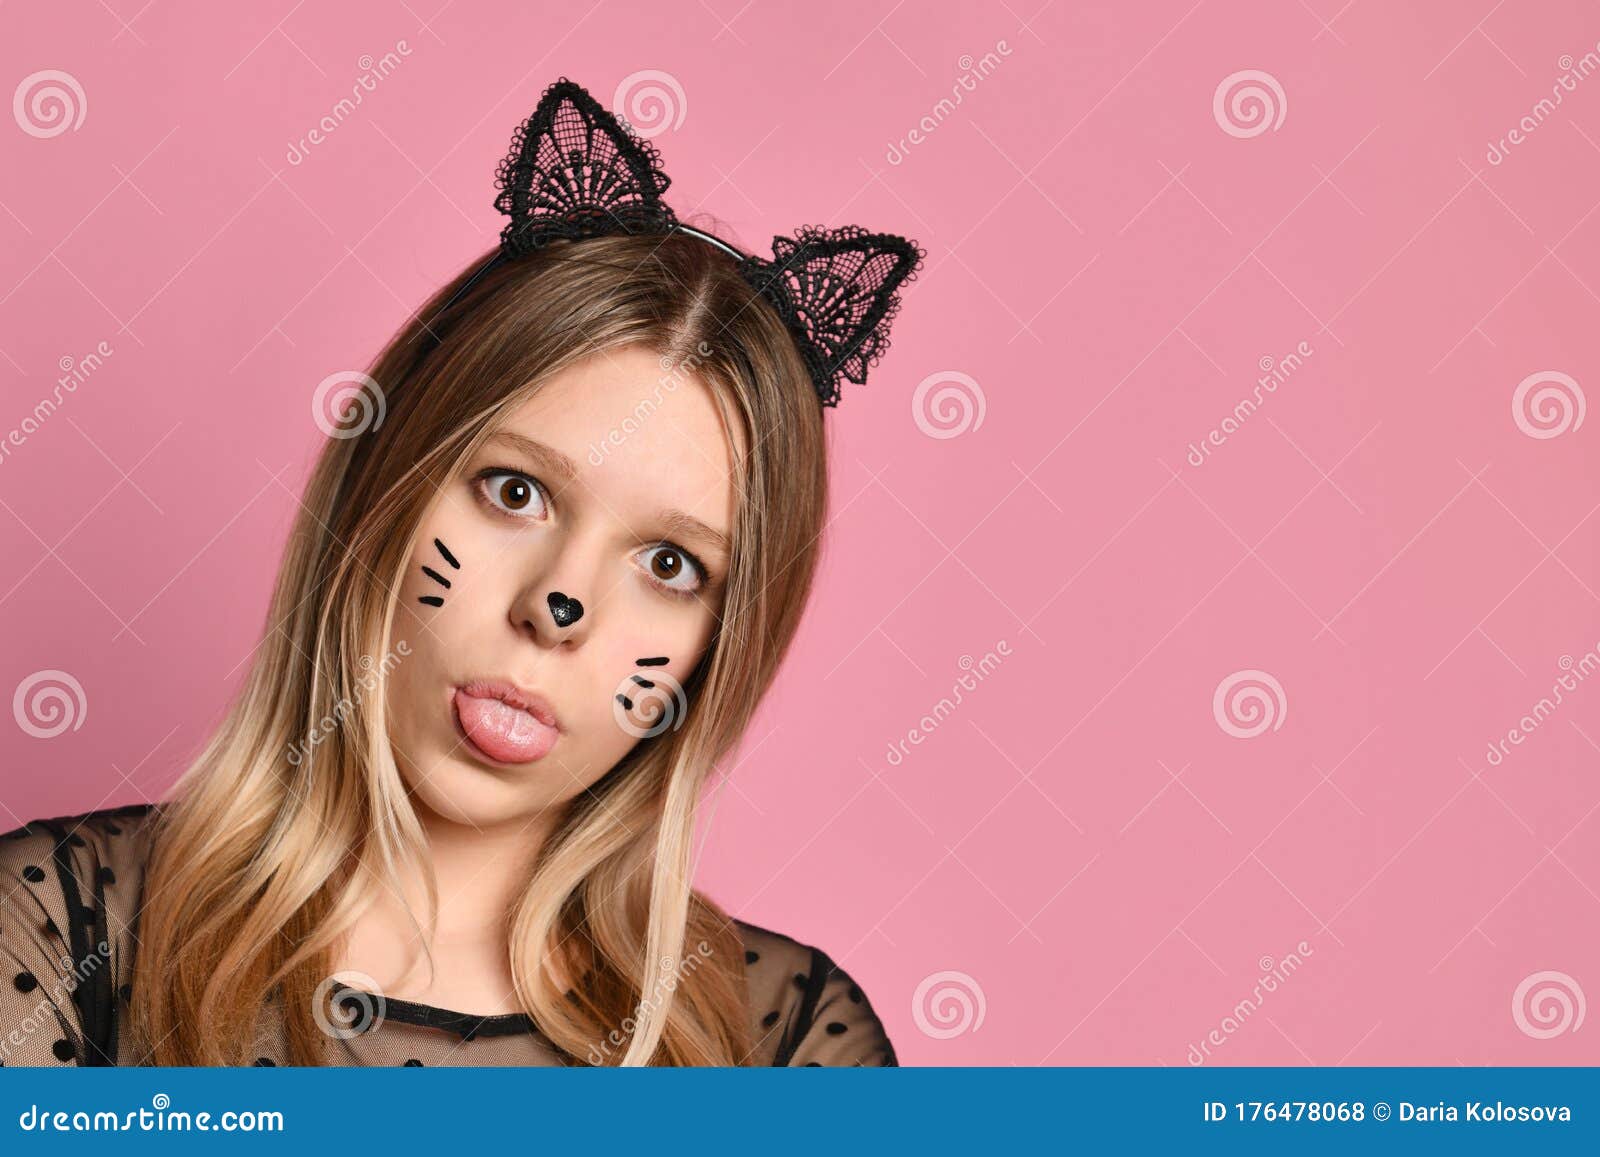 Blonde Teenager in Black Dress, Headband Like Cat Ears, Face Painting. she  Showing Her Tongue, Posing on Pink Background. Close Up Stock Photo - Image  of headband, clothes: 176478068